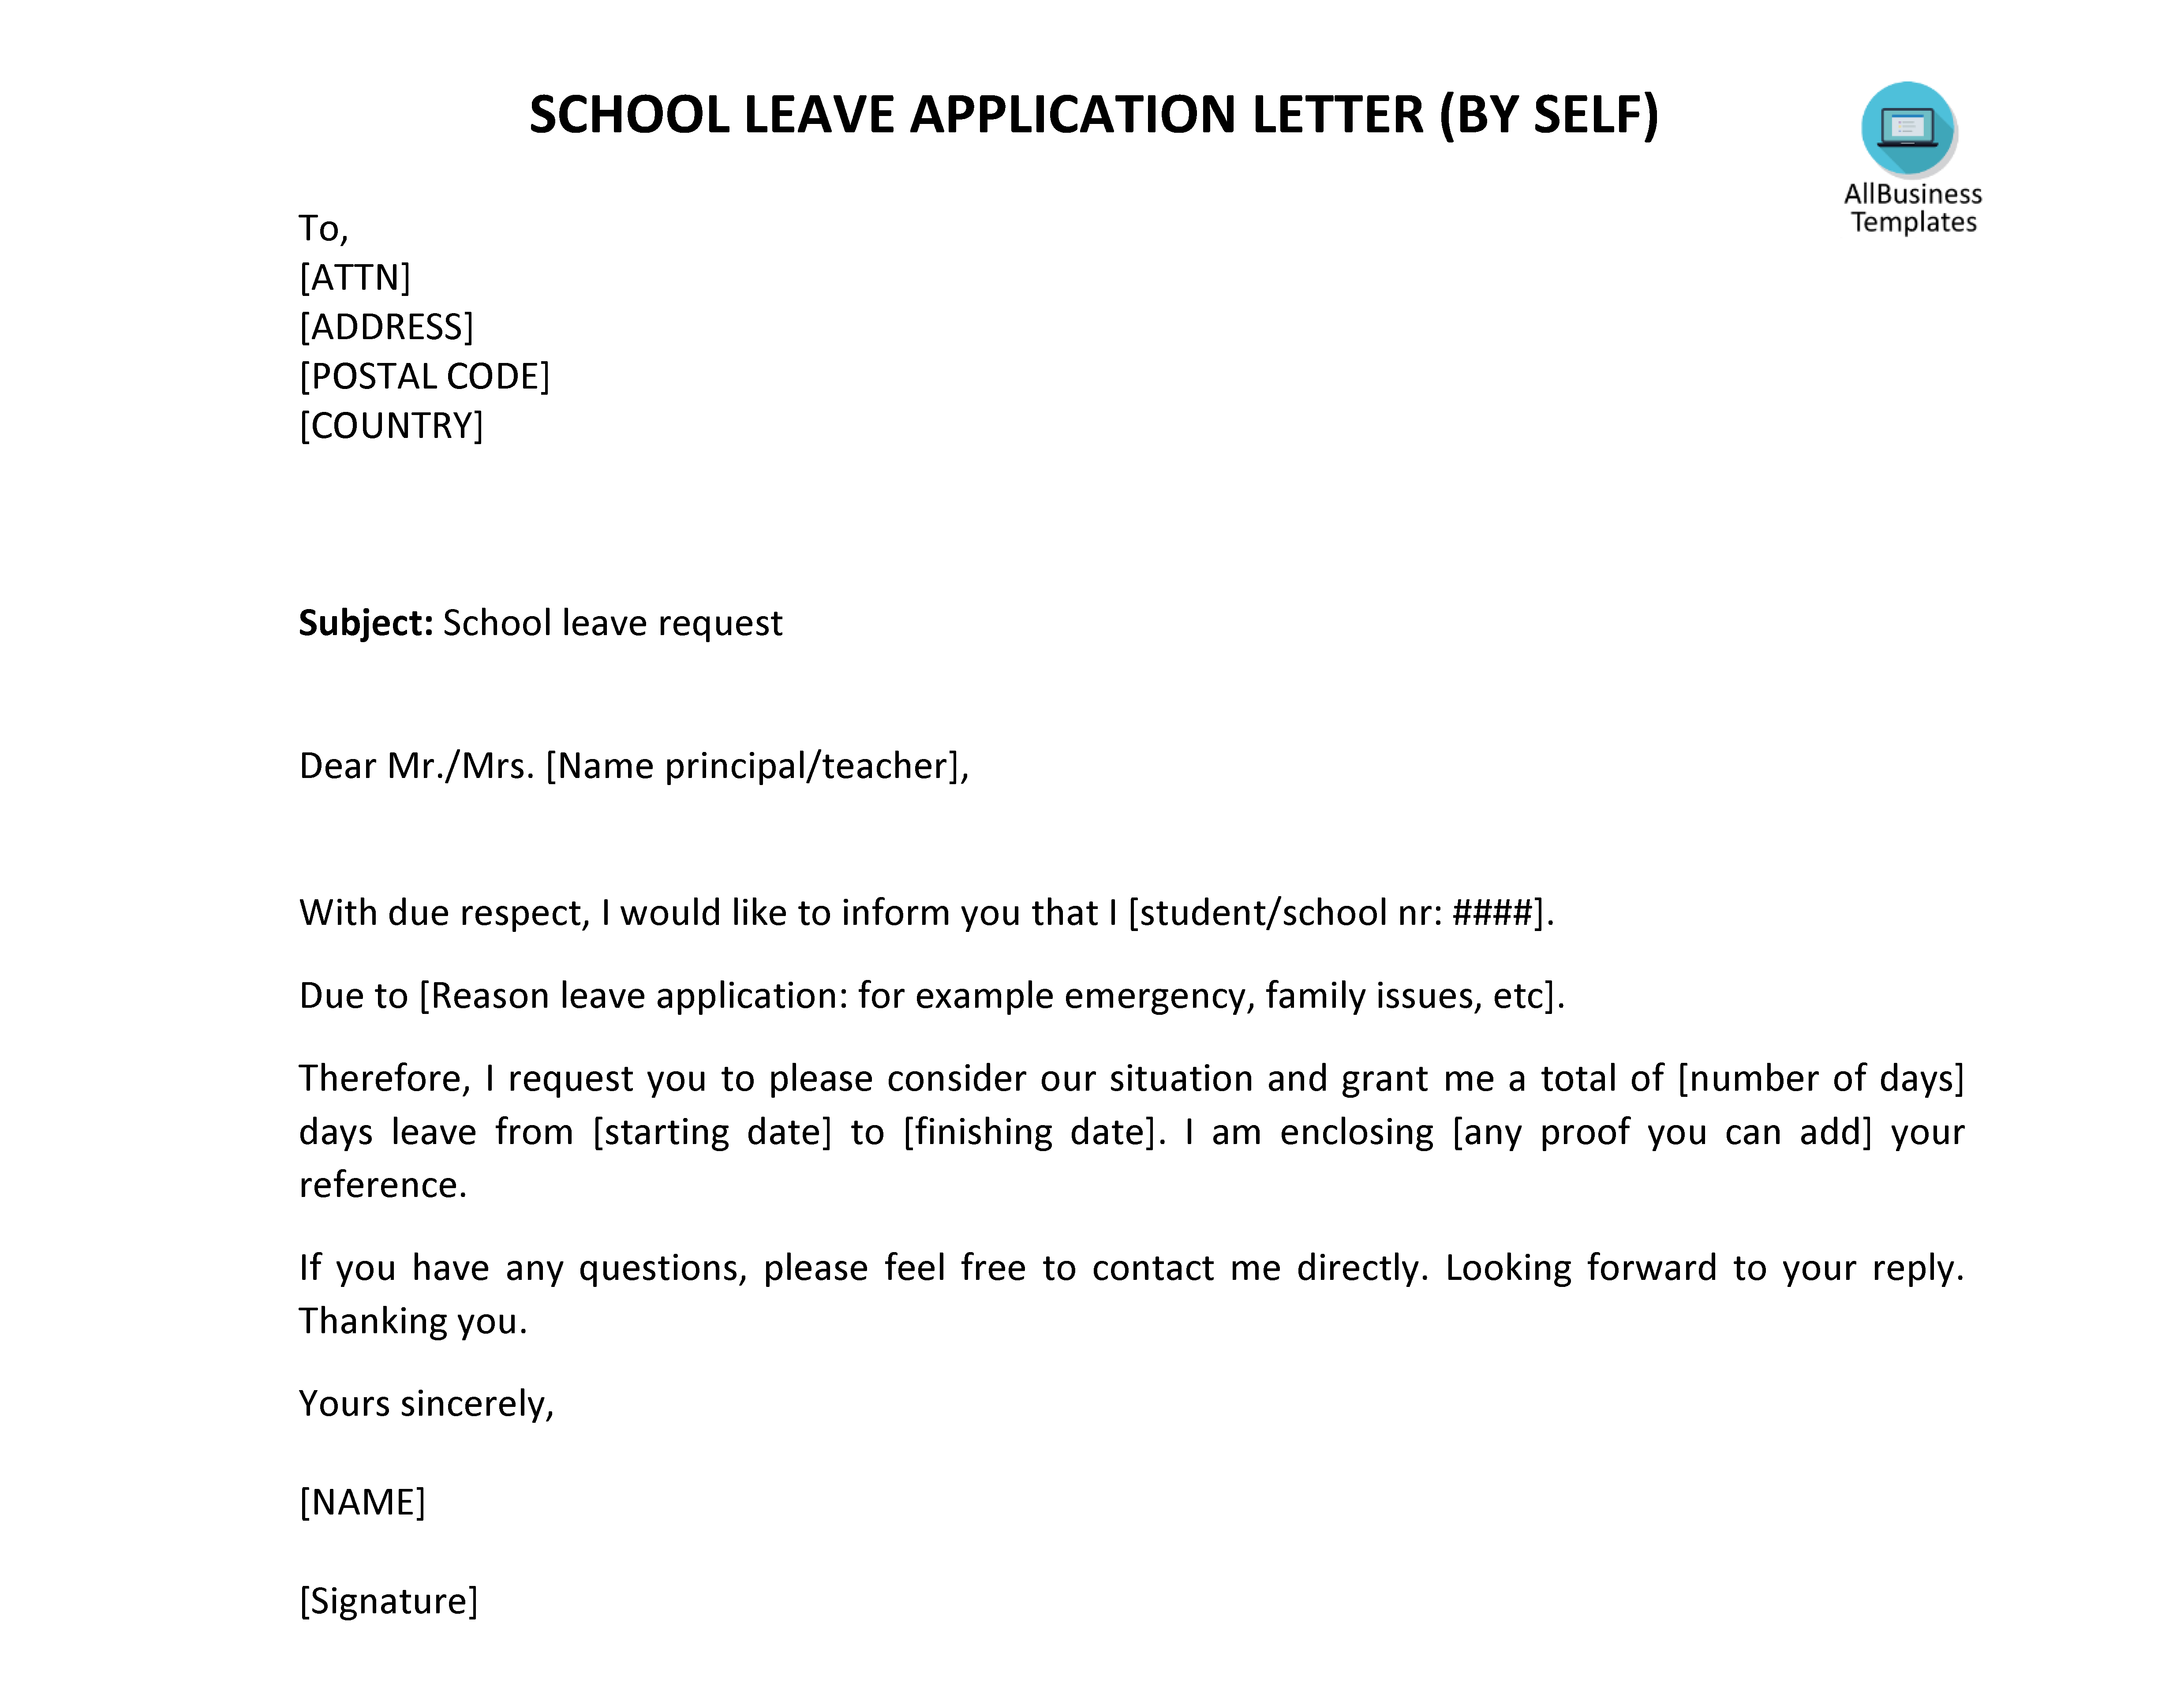 how to write a letter for school absent